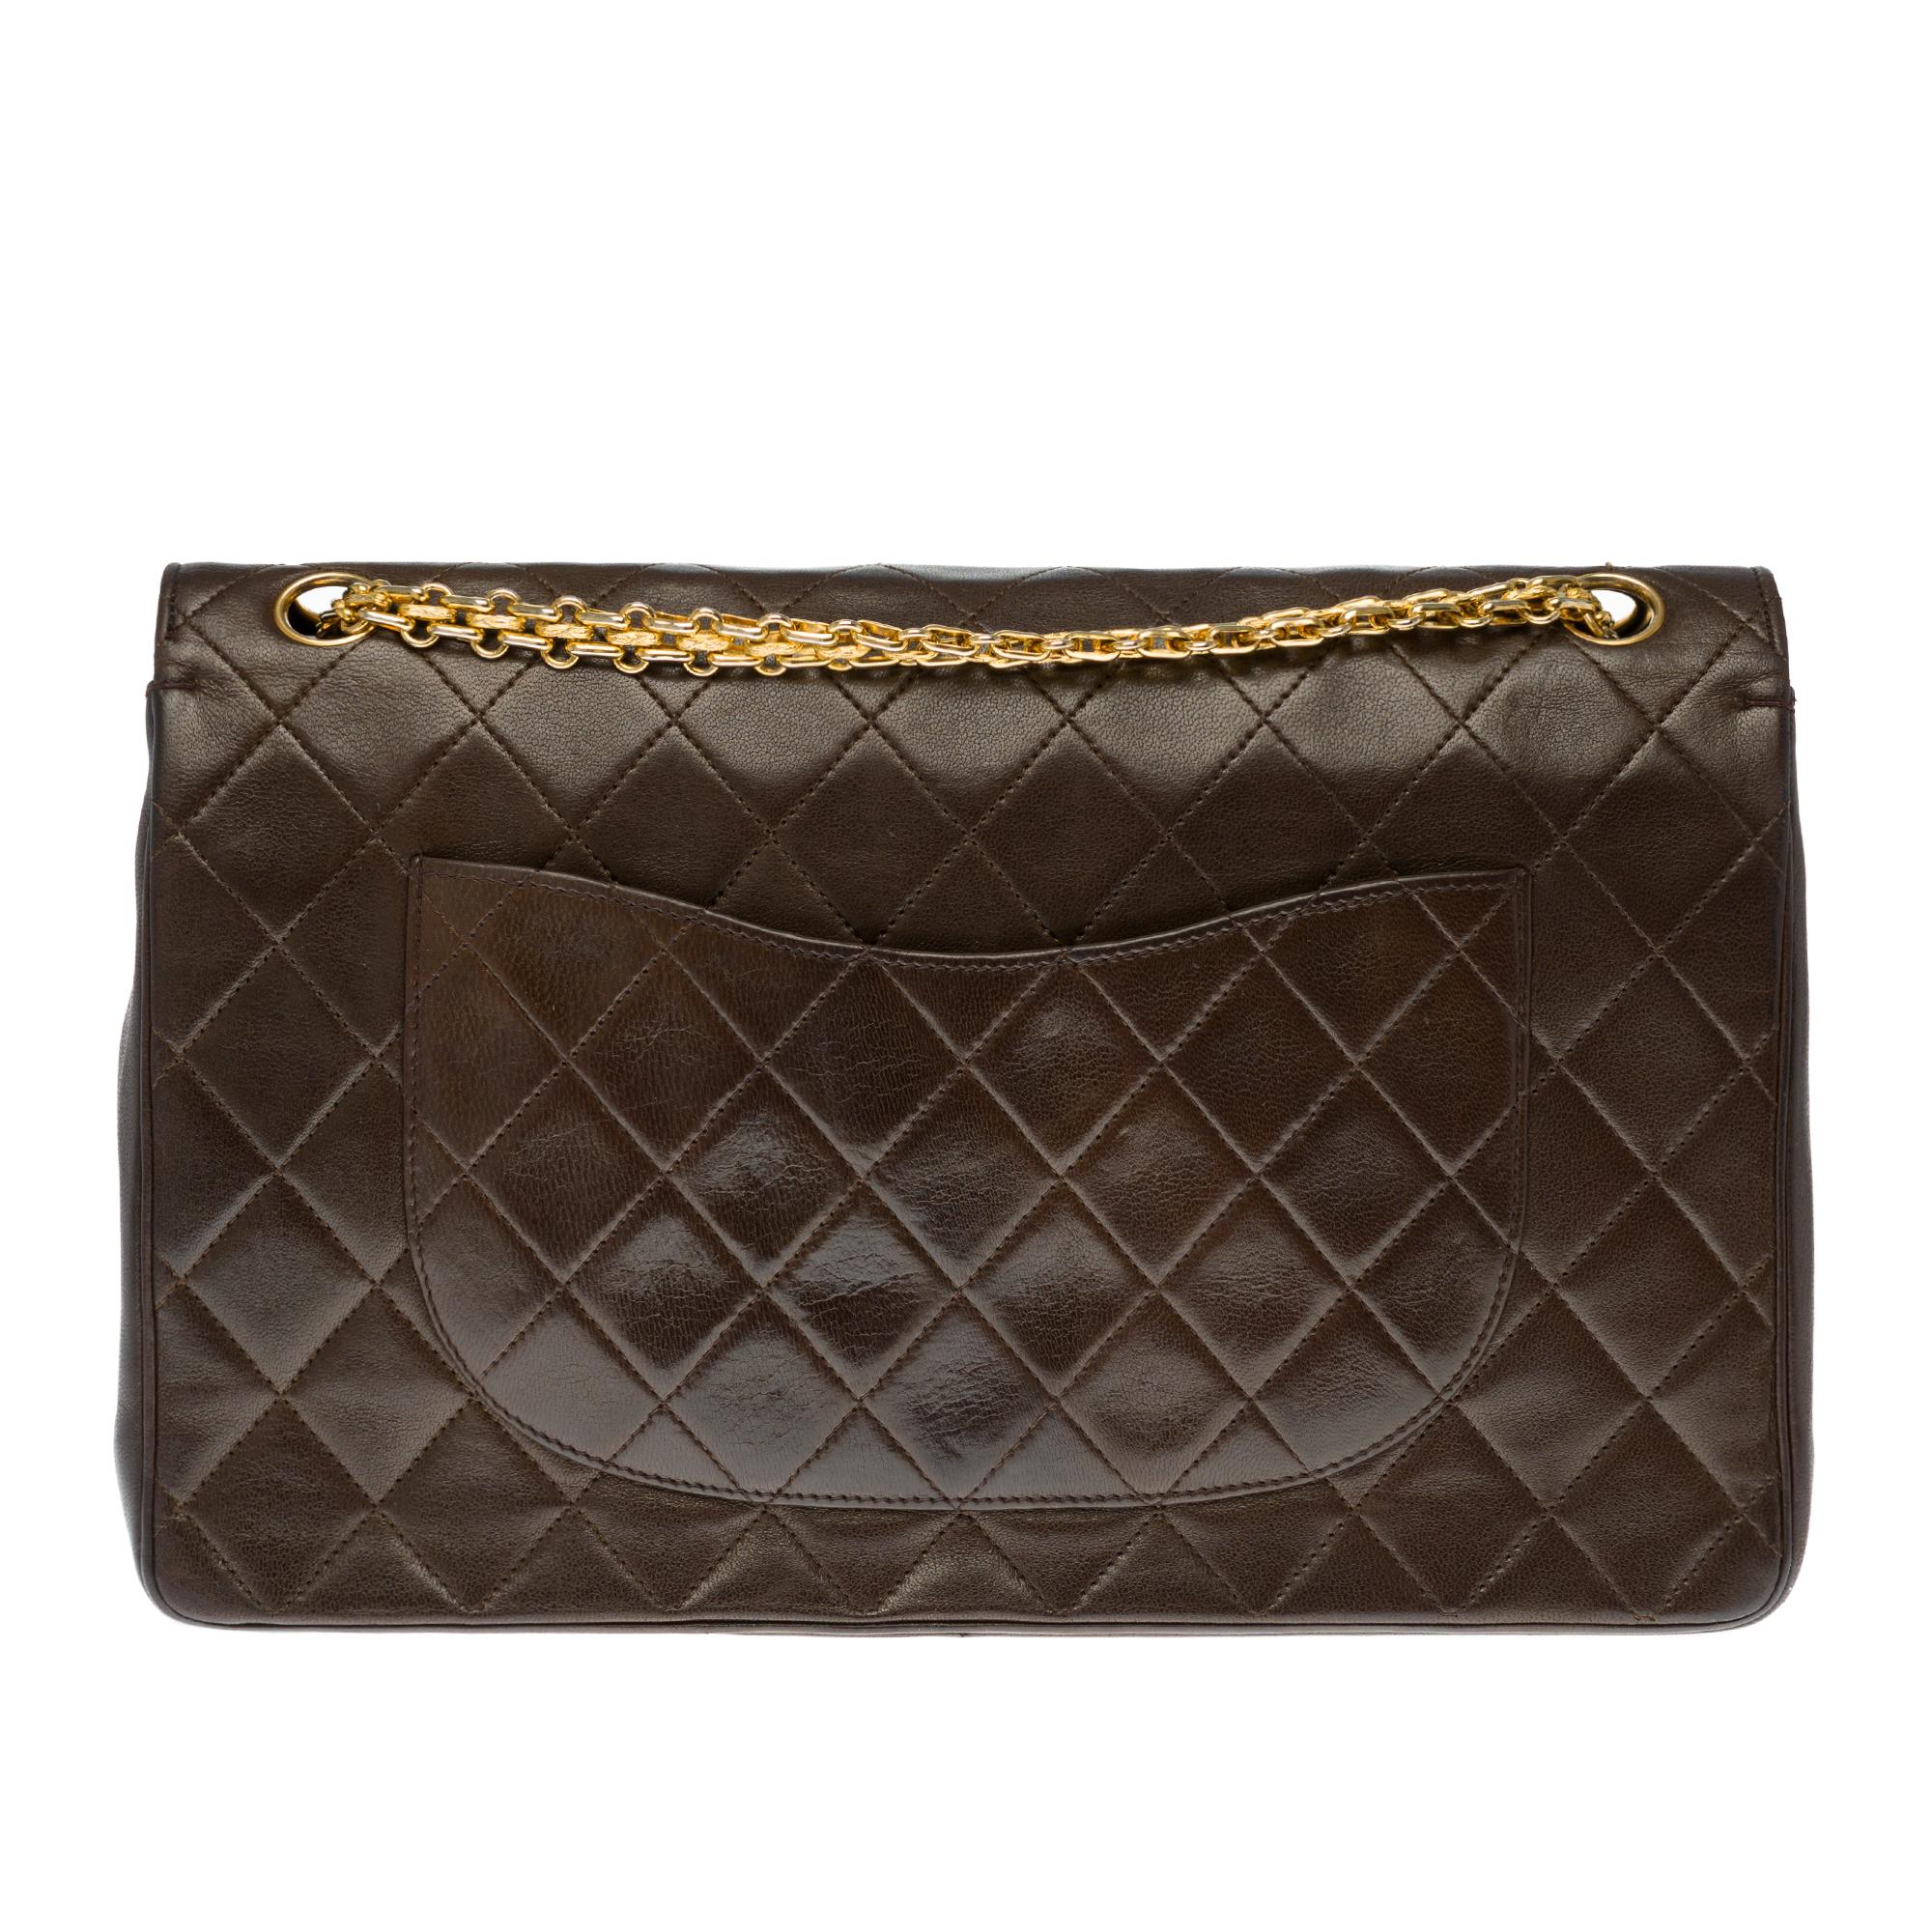 Rare Chanel Timeless 27cm two-tone handbag with double flap in brown quilted lambskin leather trimmed in gold metal, a Mademoiselle chain handle in gold metal allowing a hand or shoulder support.

Closure with gold metal flap.
A patch pocket on the